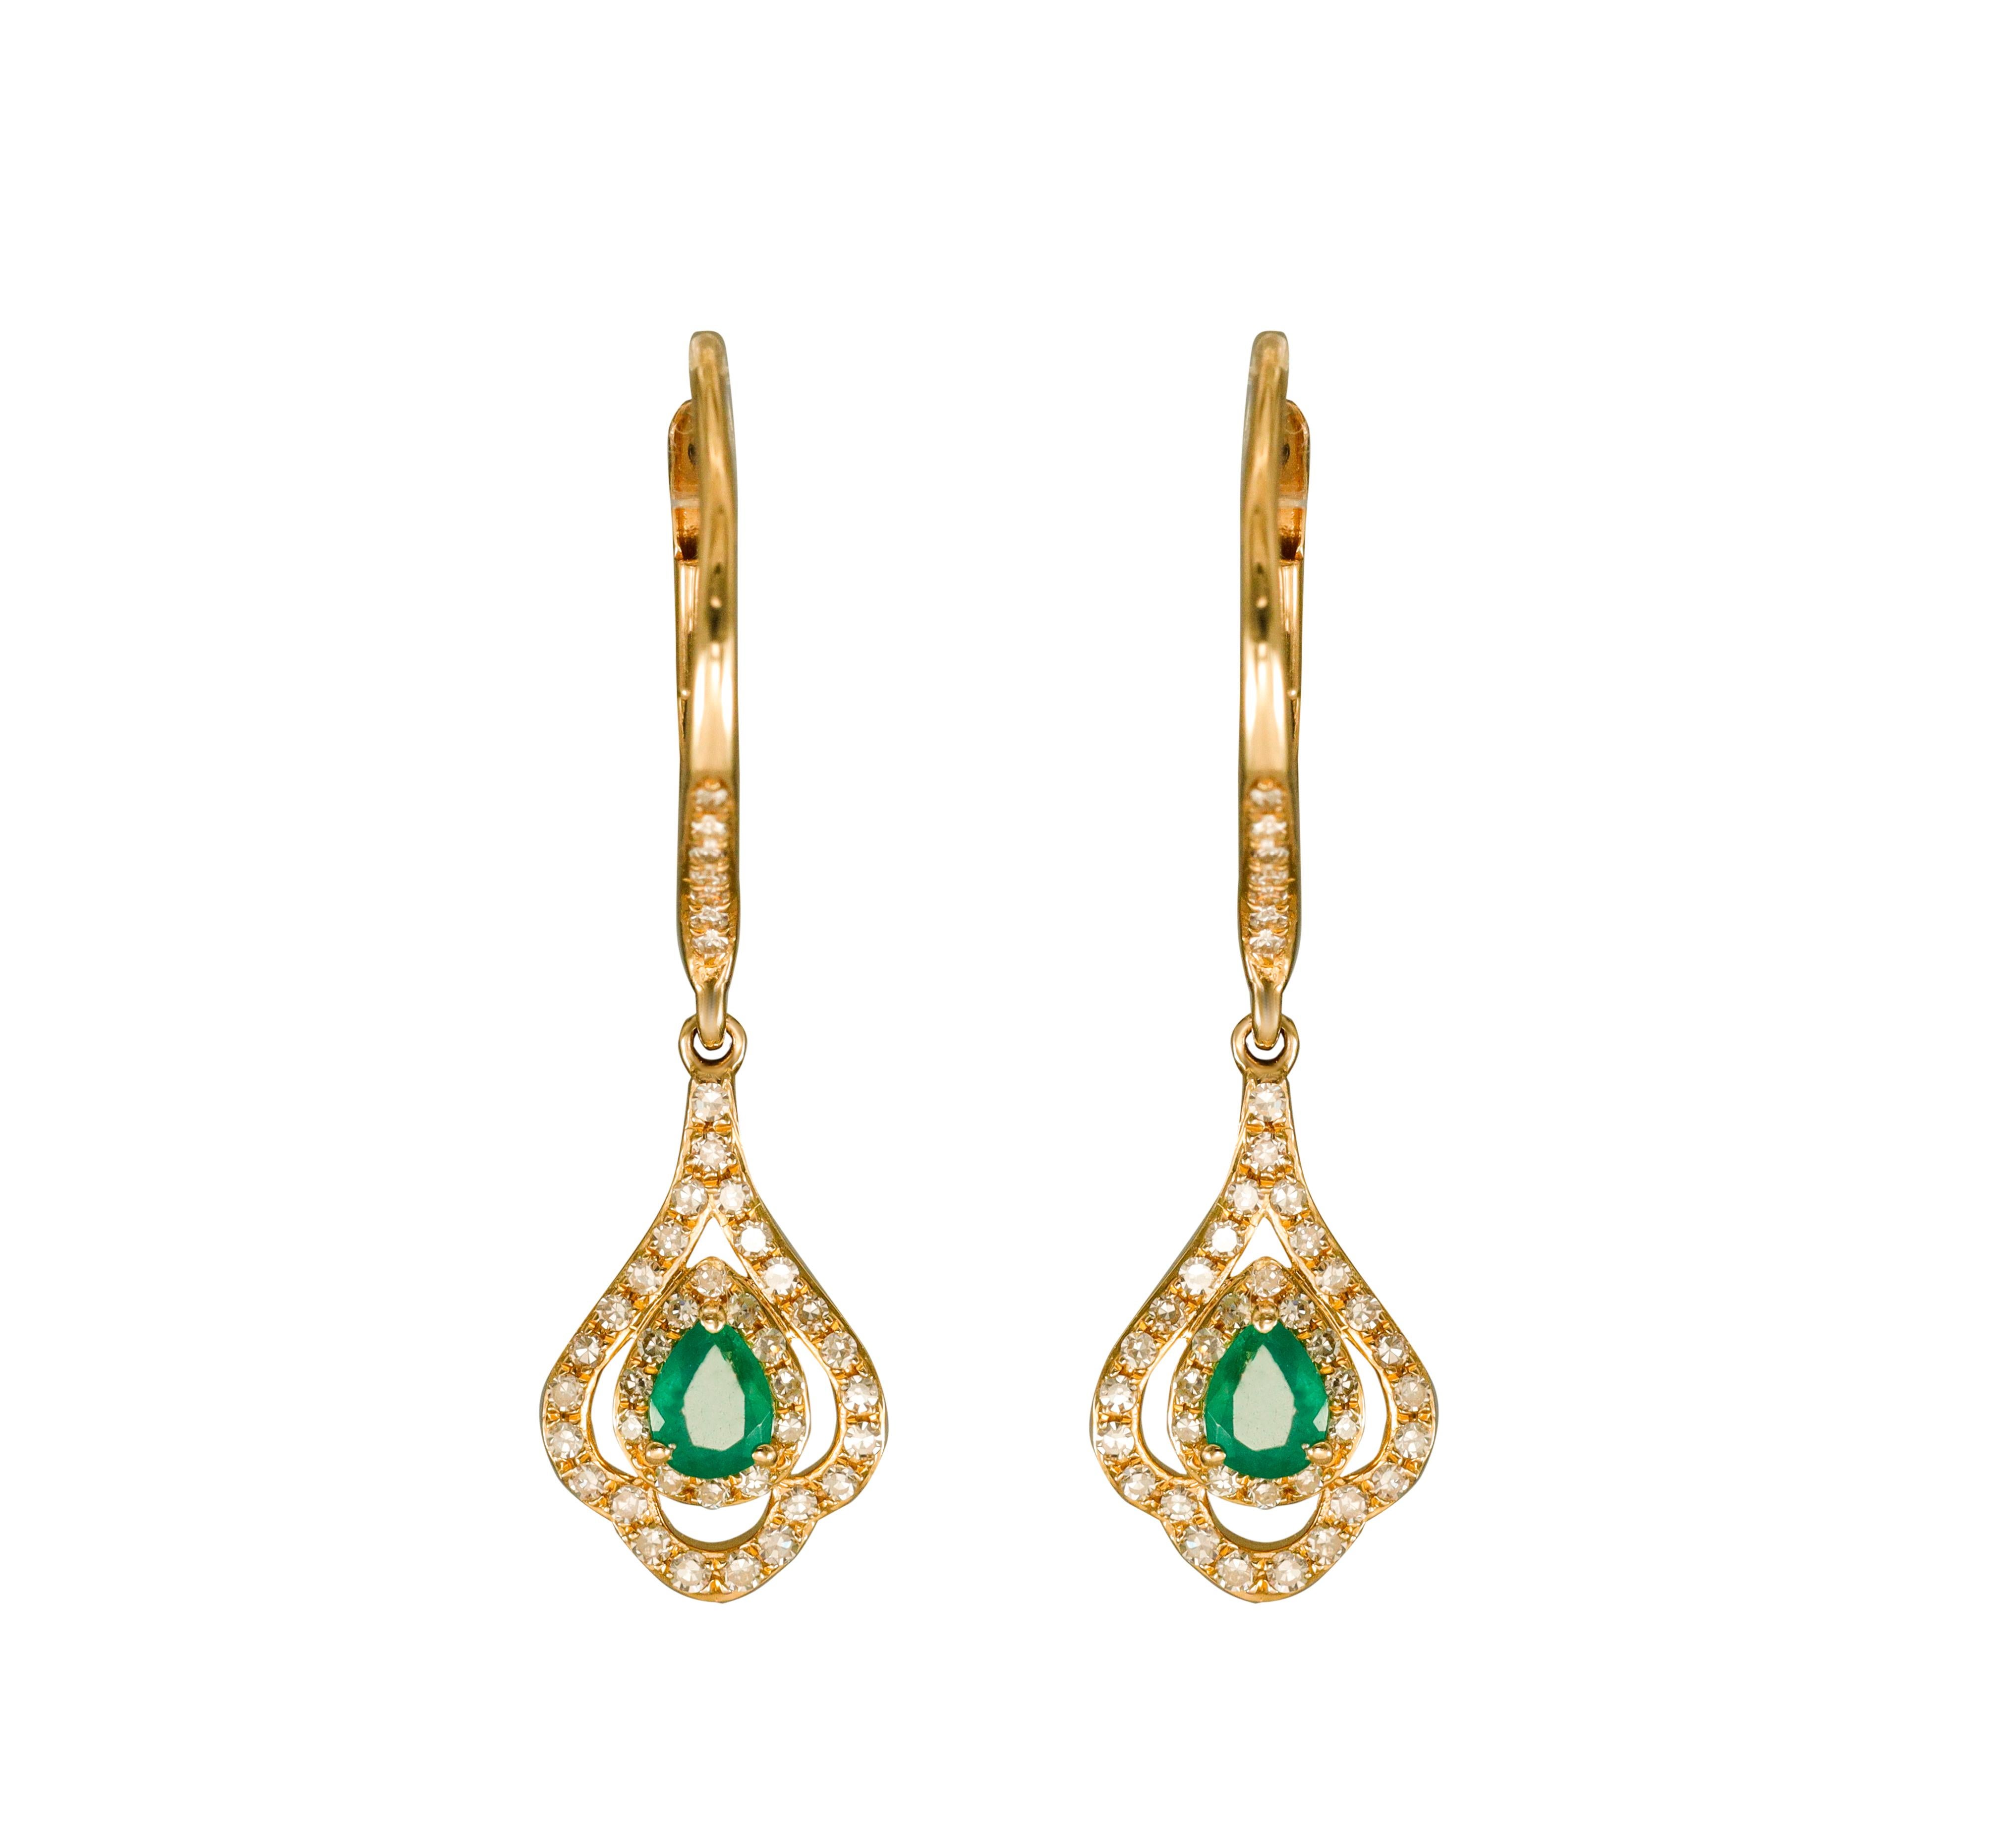 Round Cut 14K Yellow Gold Emerald and Diamond Earrings